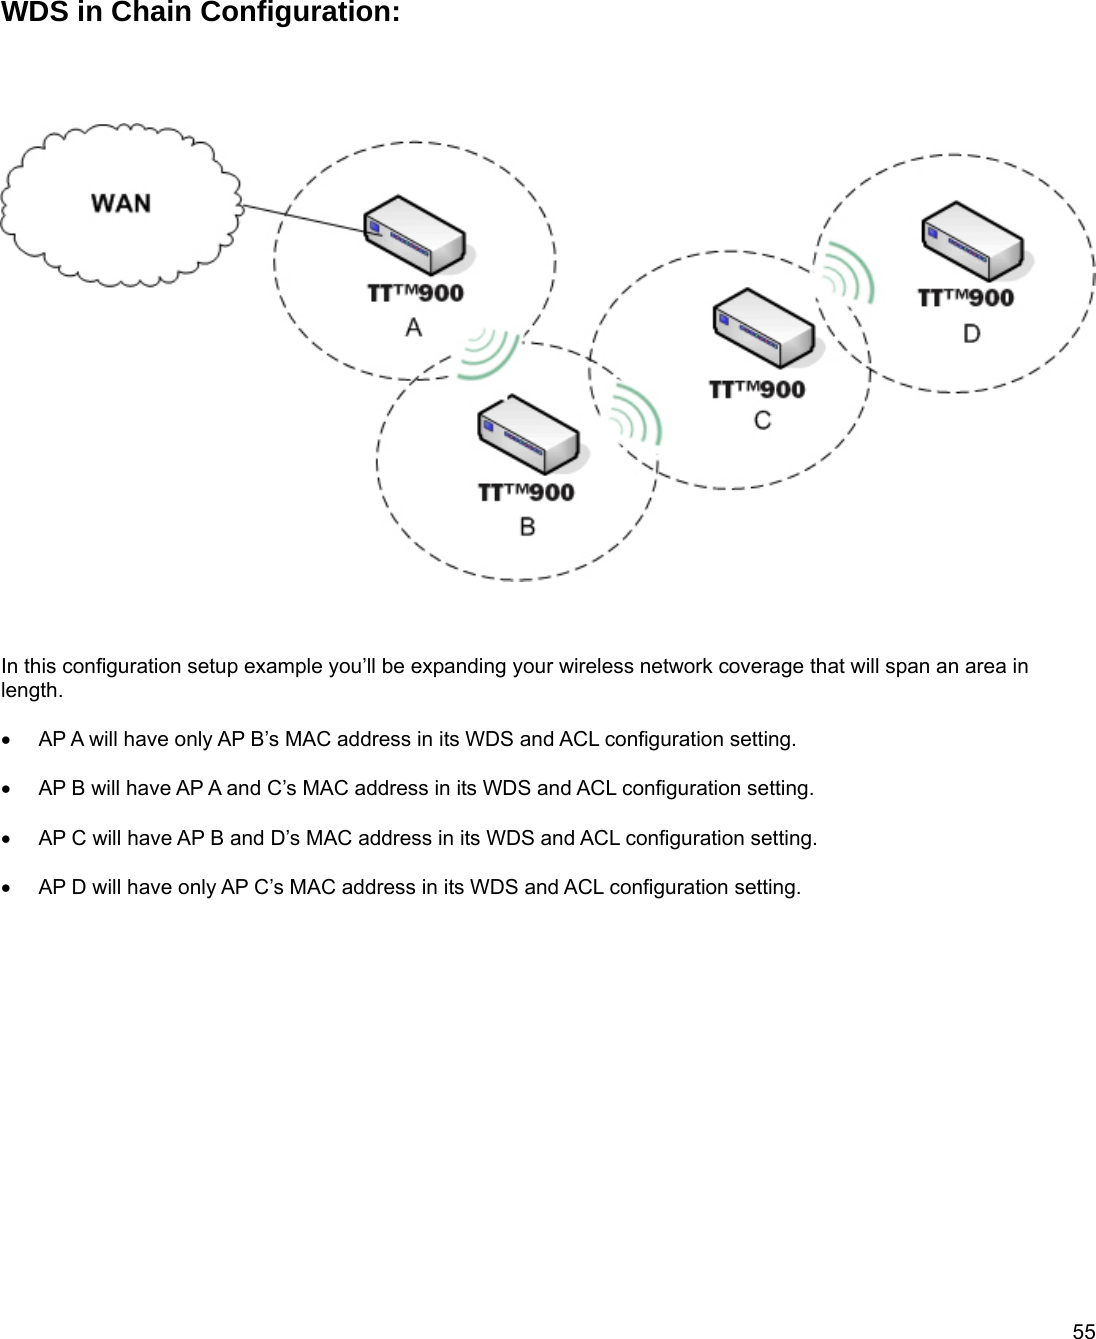  55       WDS in Chain Configuration:         In this configuration setup example you’ll be expanding your wireless network coverage that will span an area in length.  •  AP A will have only AP B’s MAC address in its WDS and ACL configuration setting.  •  AP B will have AP A and C’s MAC address in its WDS and ACL configuration setting.  •  AP C will have AP B and D’s MAC address in its WDS and ACL configuration setting.  •  AP D will have only AP C’s MAC address in its WDS and ACL configuration setting.                 